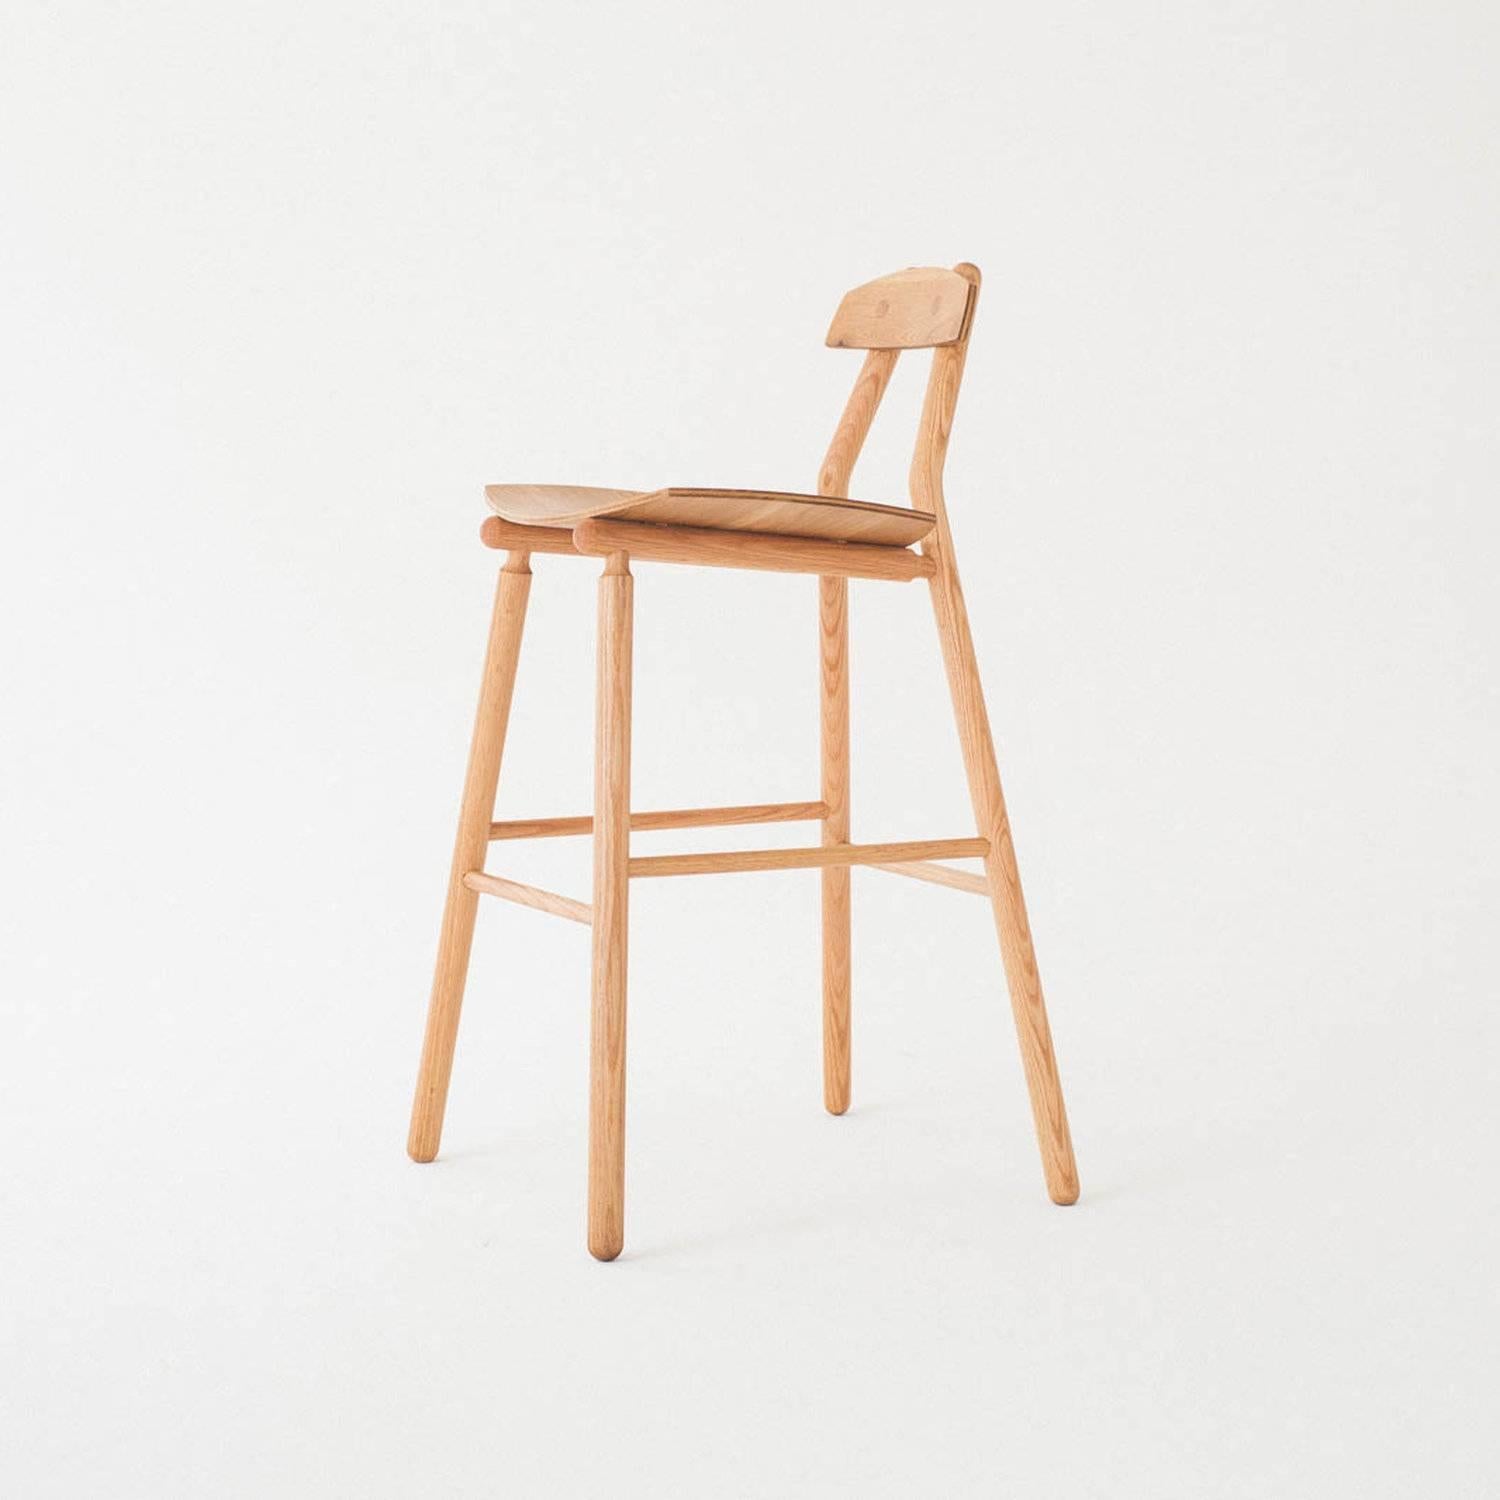 The Hiro Barstool is a contemporary, minimalist design made with traditional methods and solid wood joinery. The seat and back are fabricated from specially milled hardwood with a custom pressed curve that hugs the user. Its light and strong frame